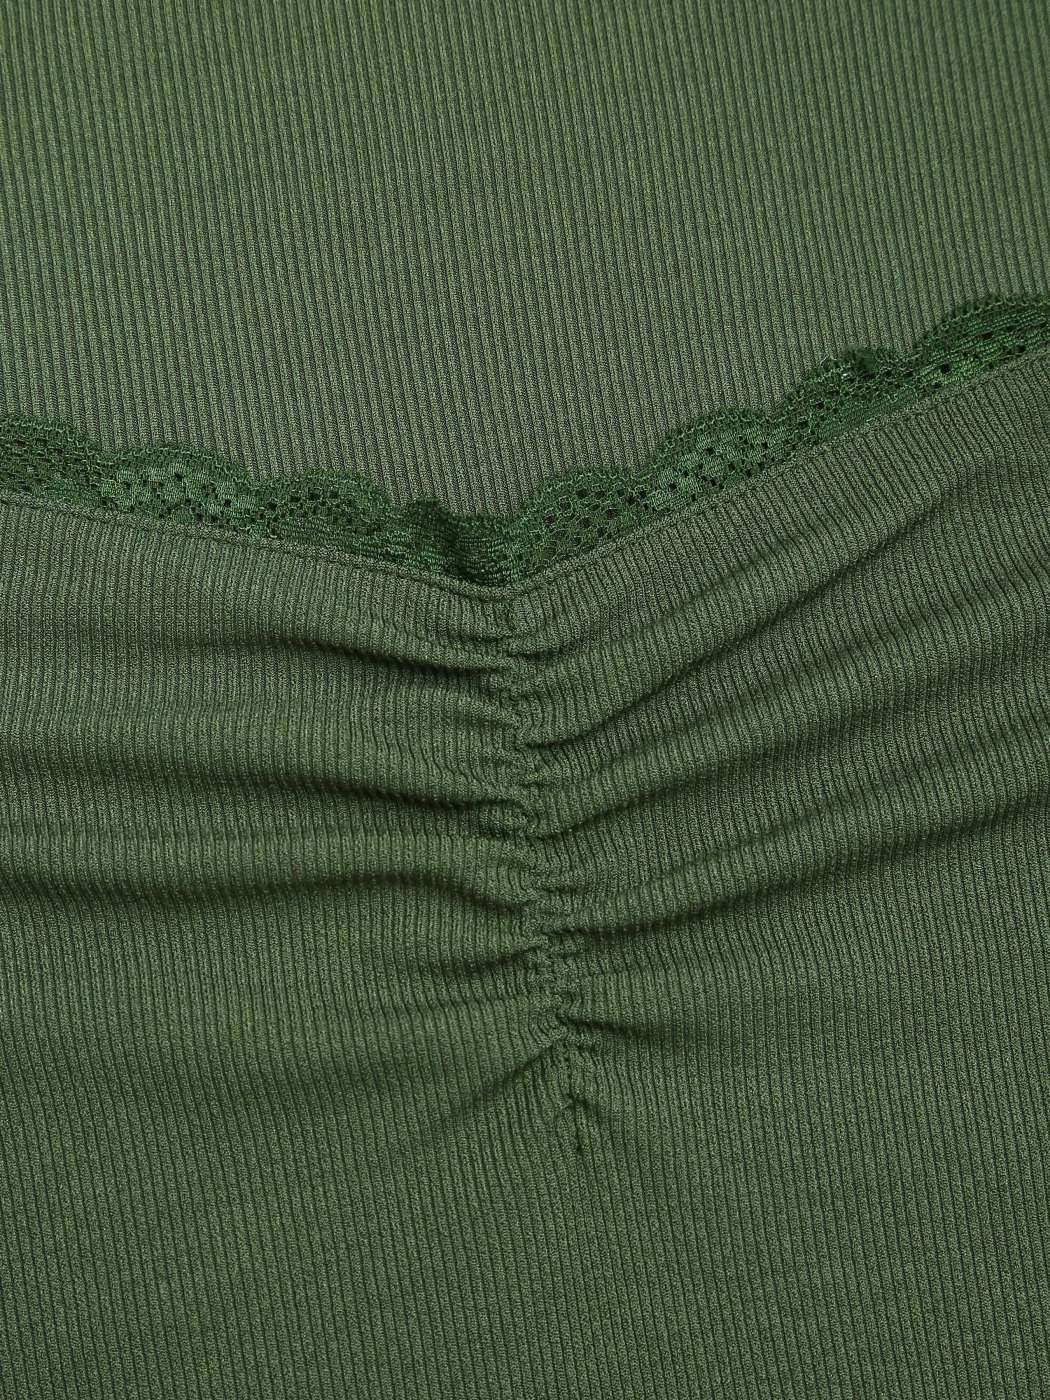 Olive Green Lace - Philippa